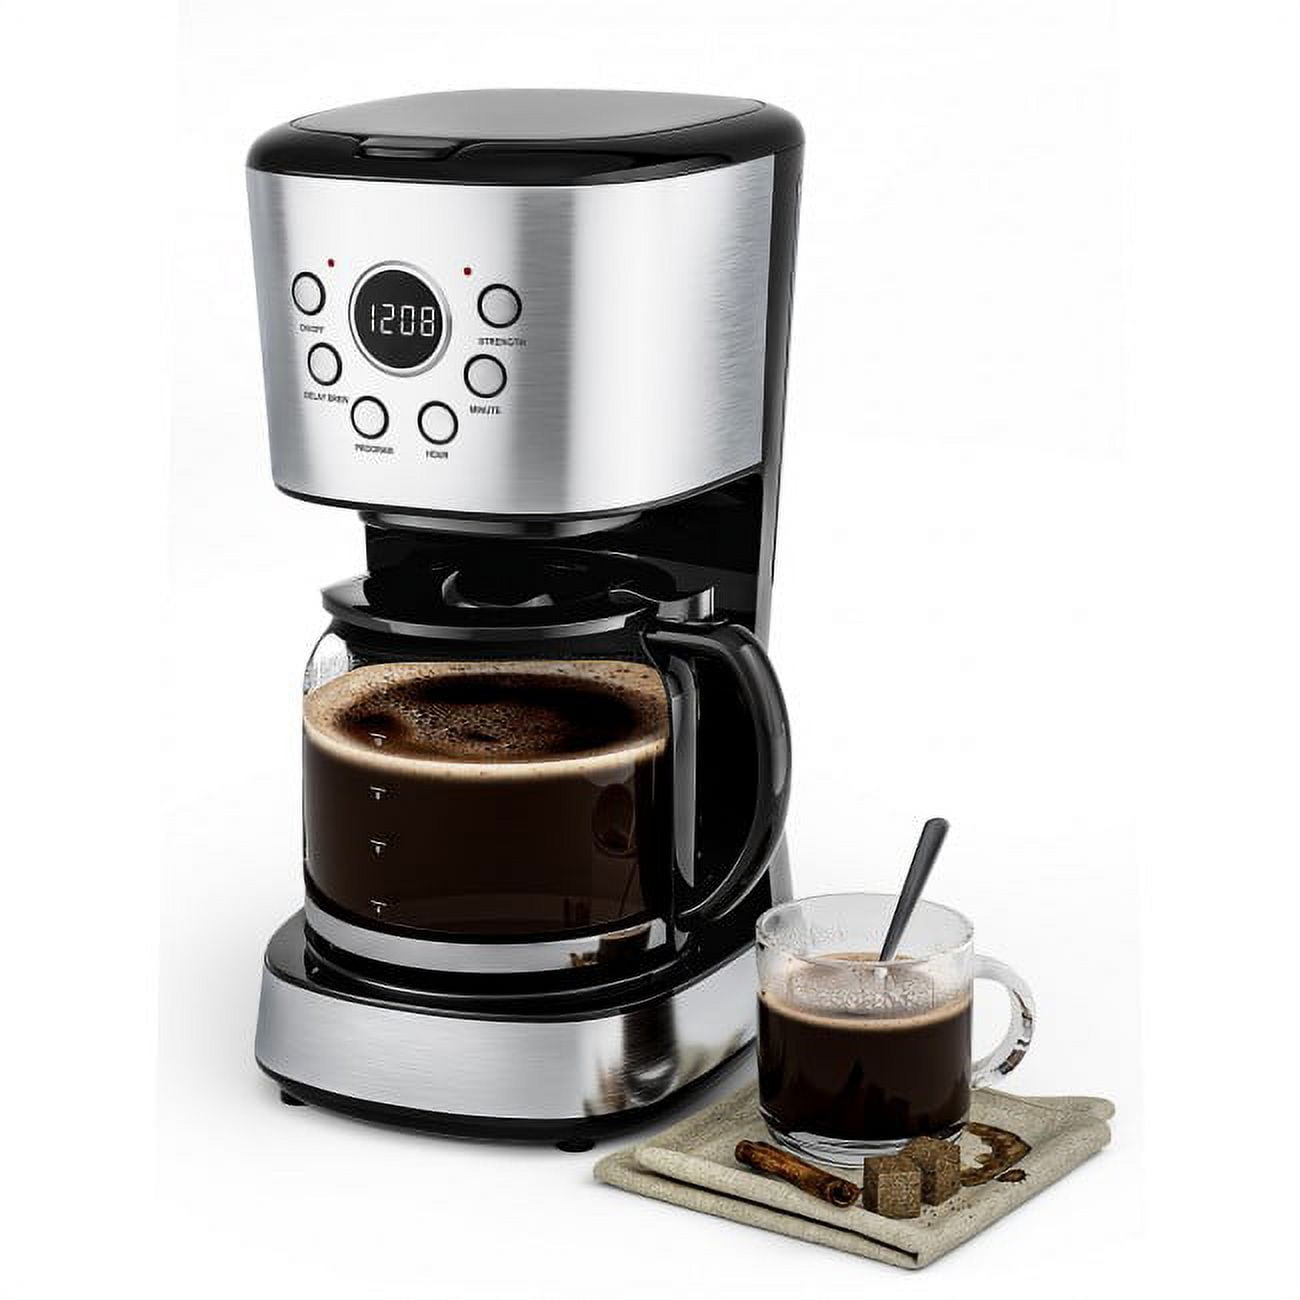 Bogner RNAB0BYTMDF63 bogner programmable drip coffee maker with timer, 12  cup capacity, stainless steel with digital board, 1000w power, permanent